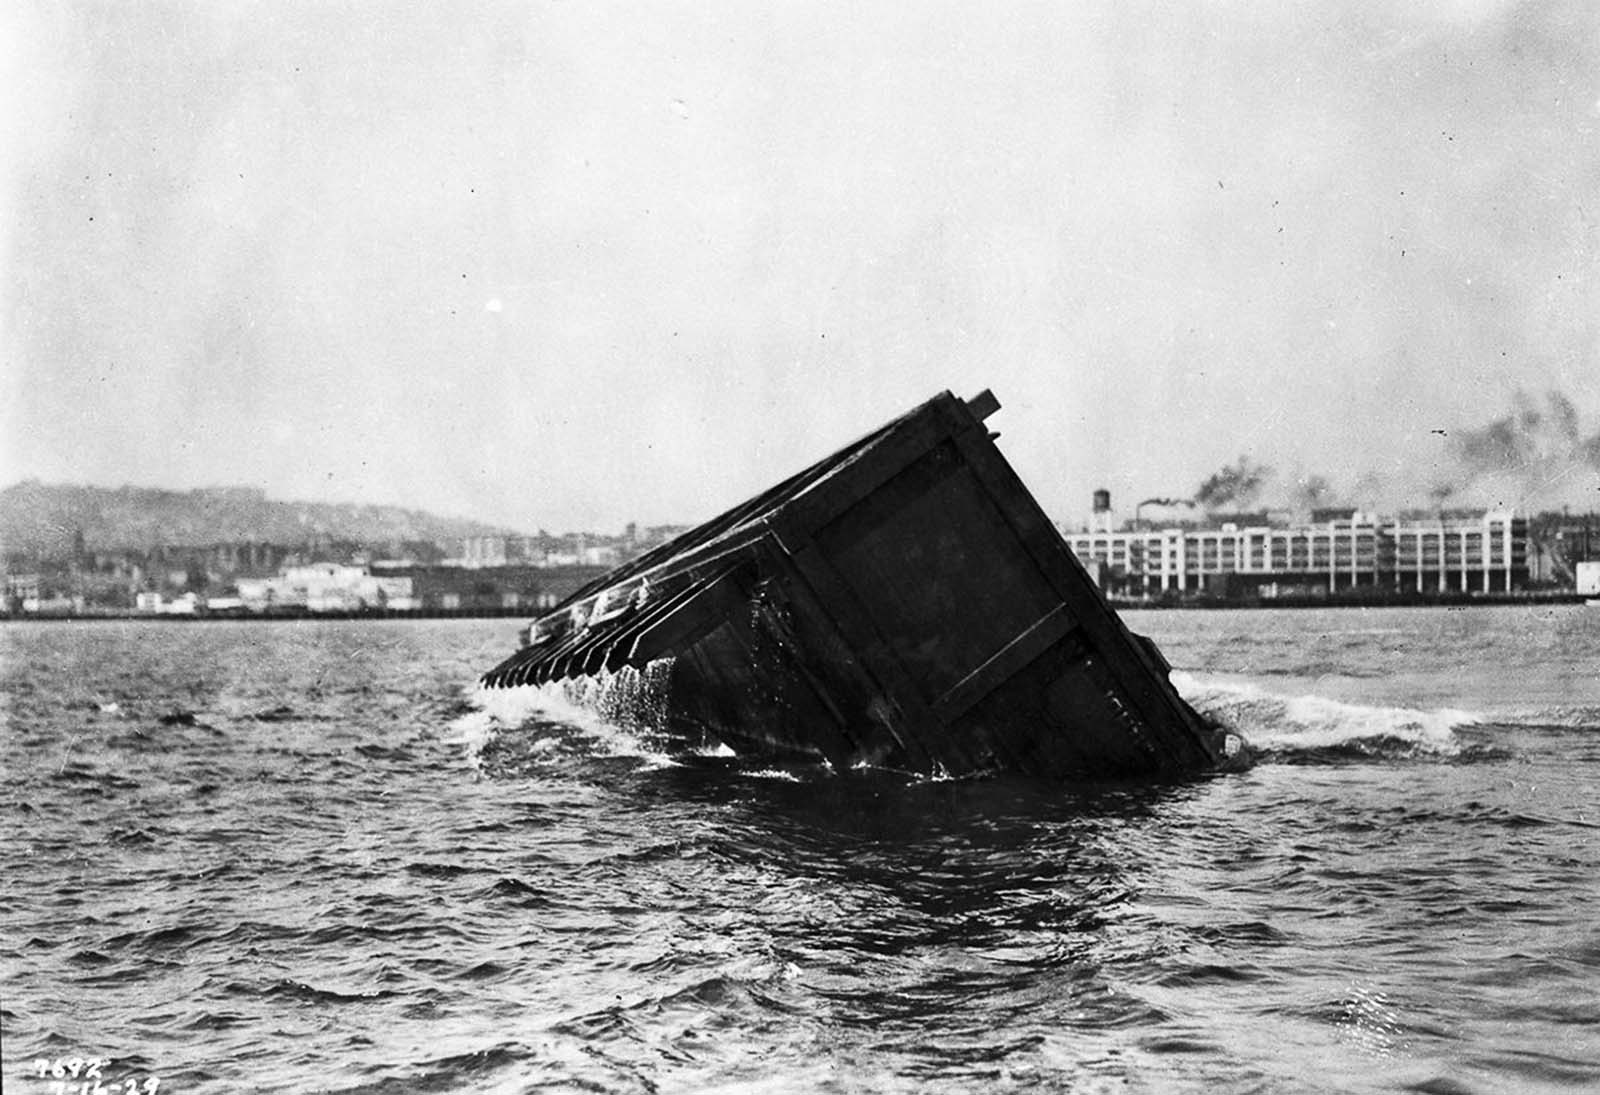 A self-capsizing scow carrying earth dumps its load into the city’s harbor.